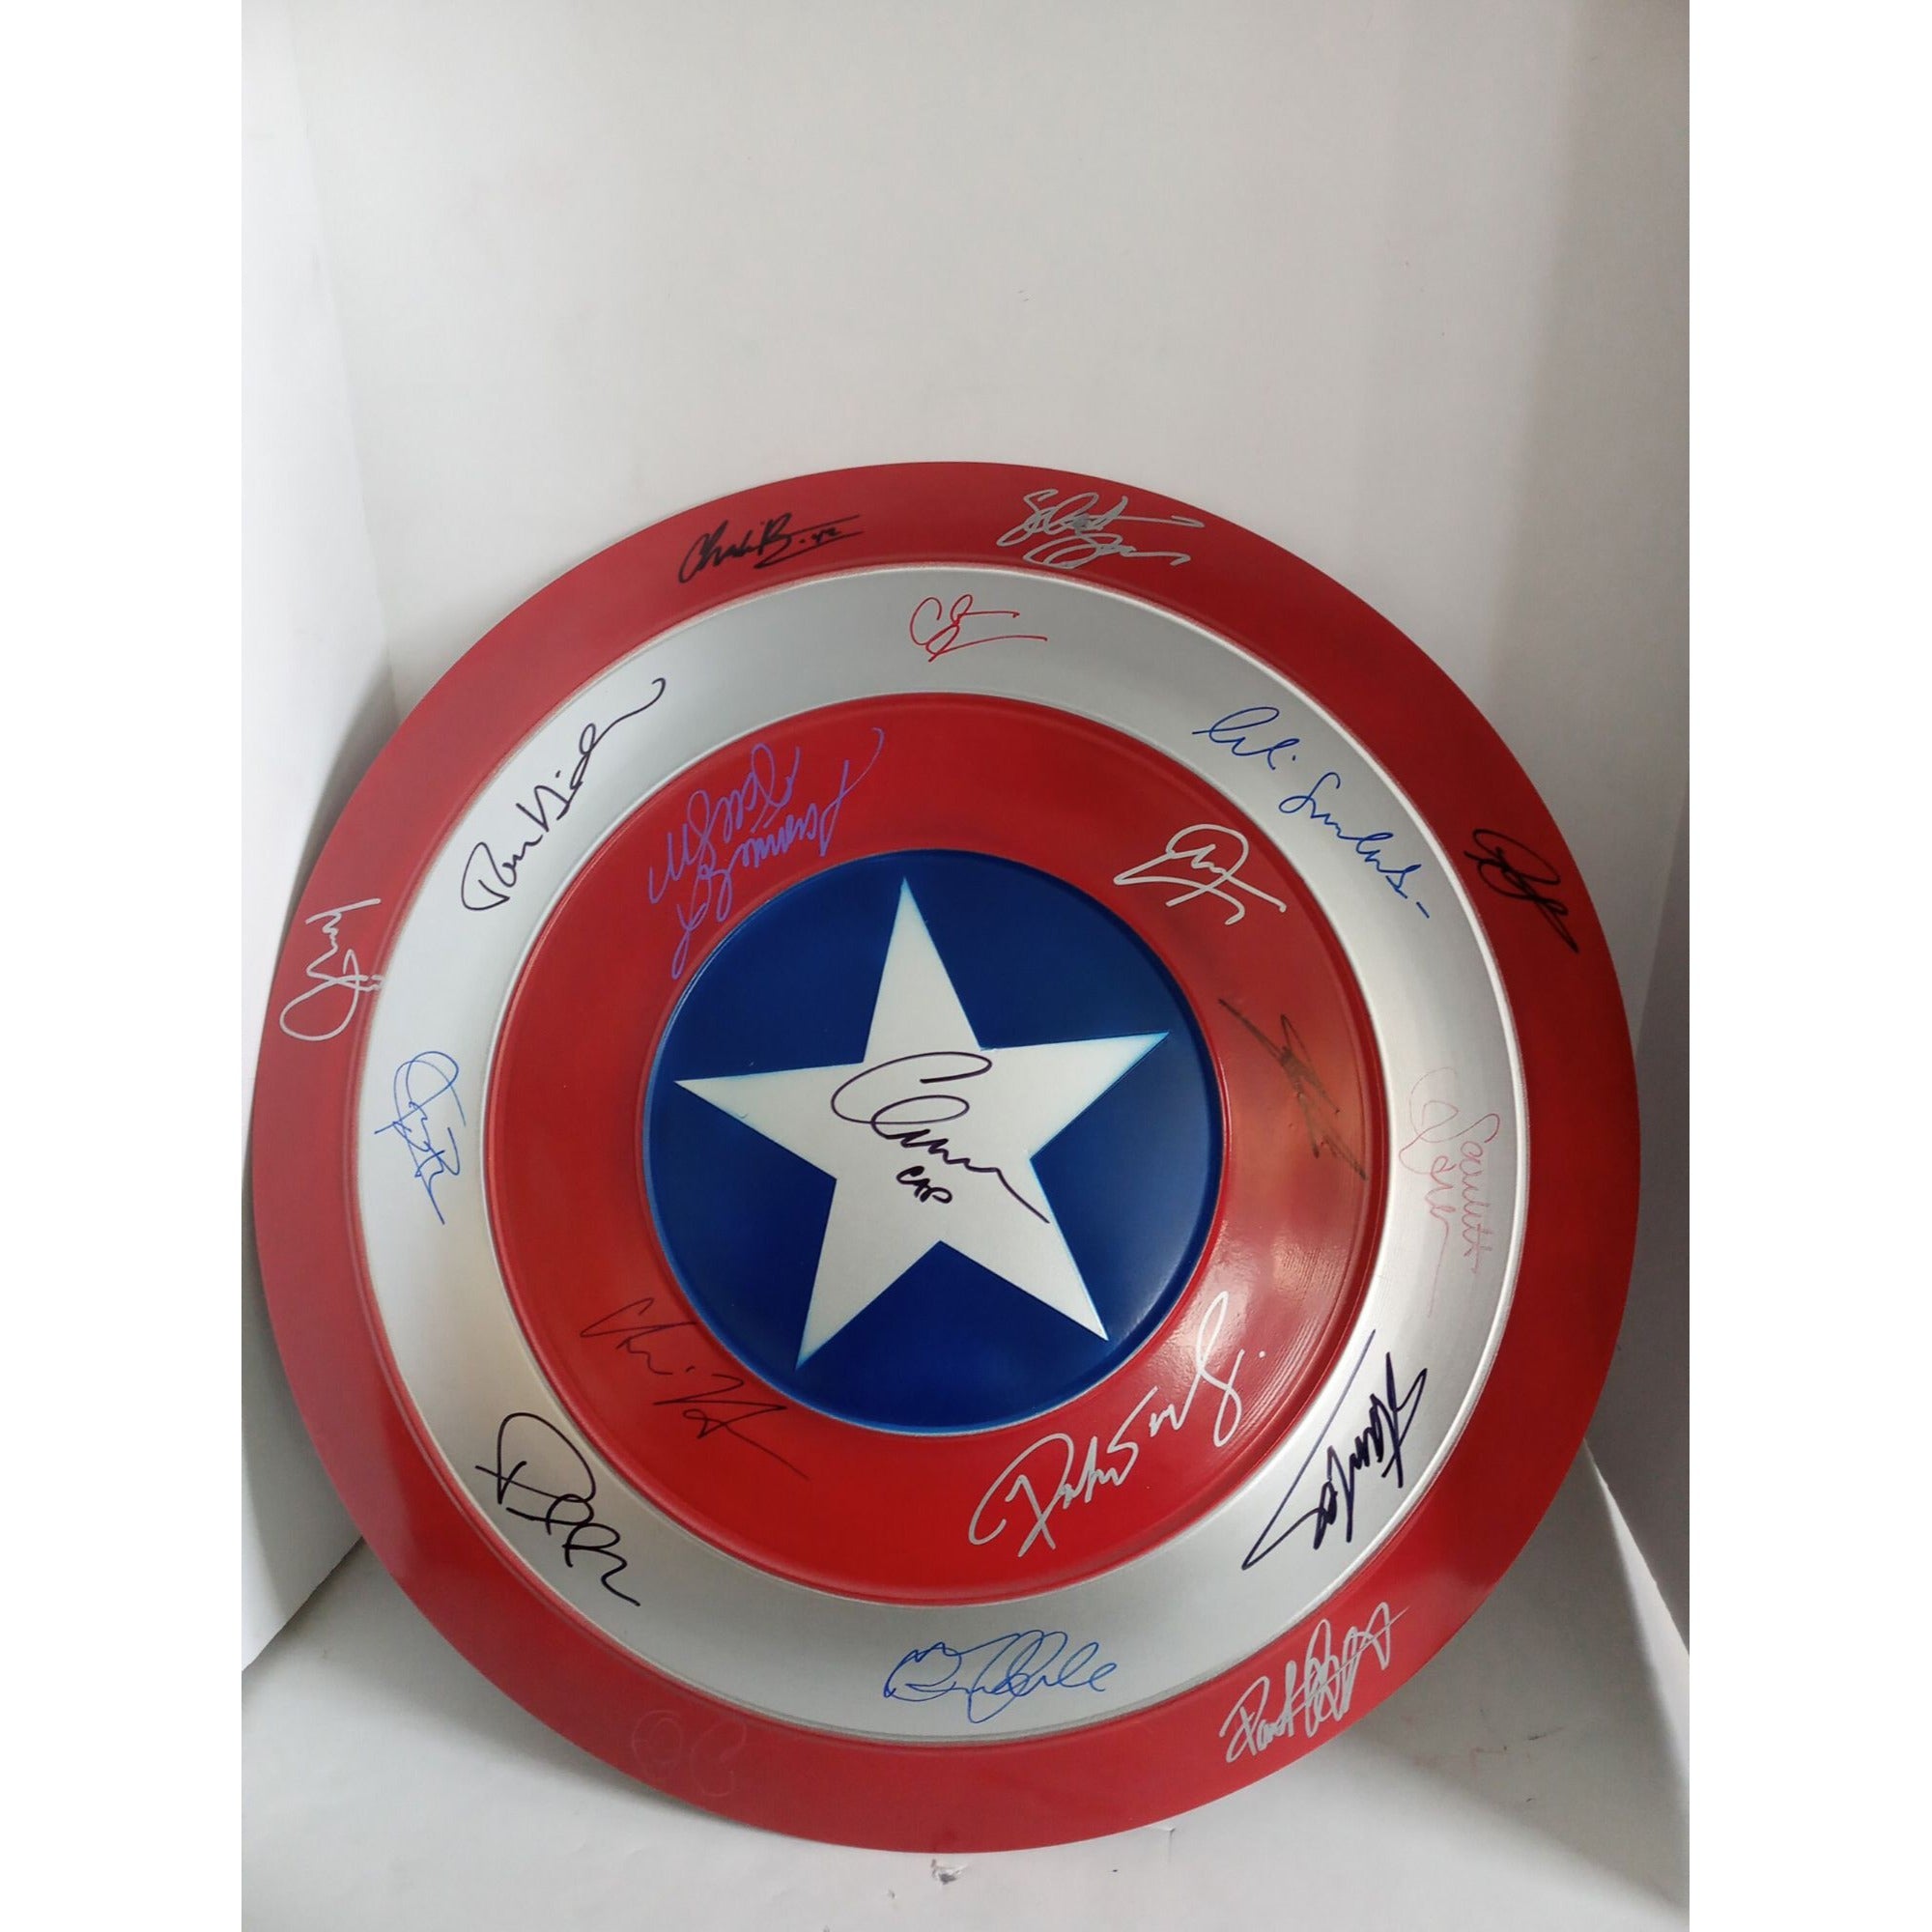 Captain America Chris Evans Robert Downey Jr 3/4 size shield 13x13 signed with proof 15 signed